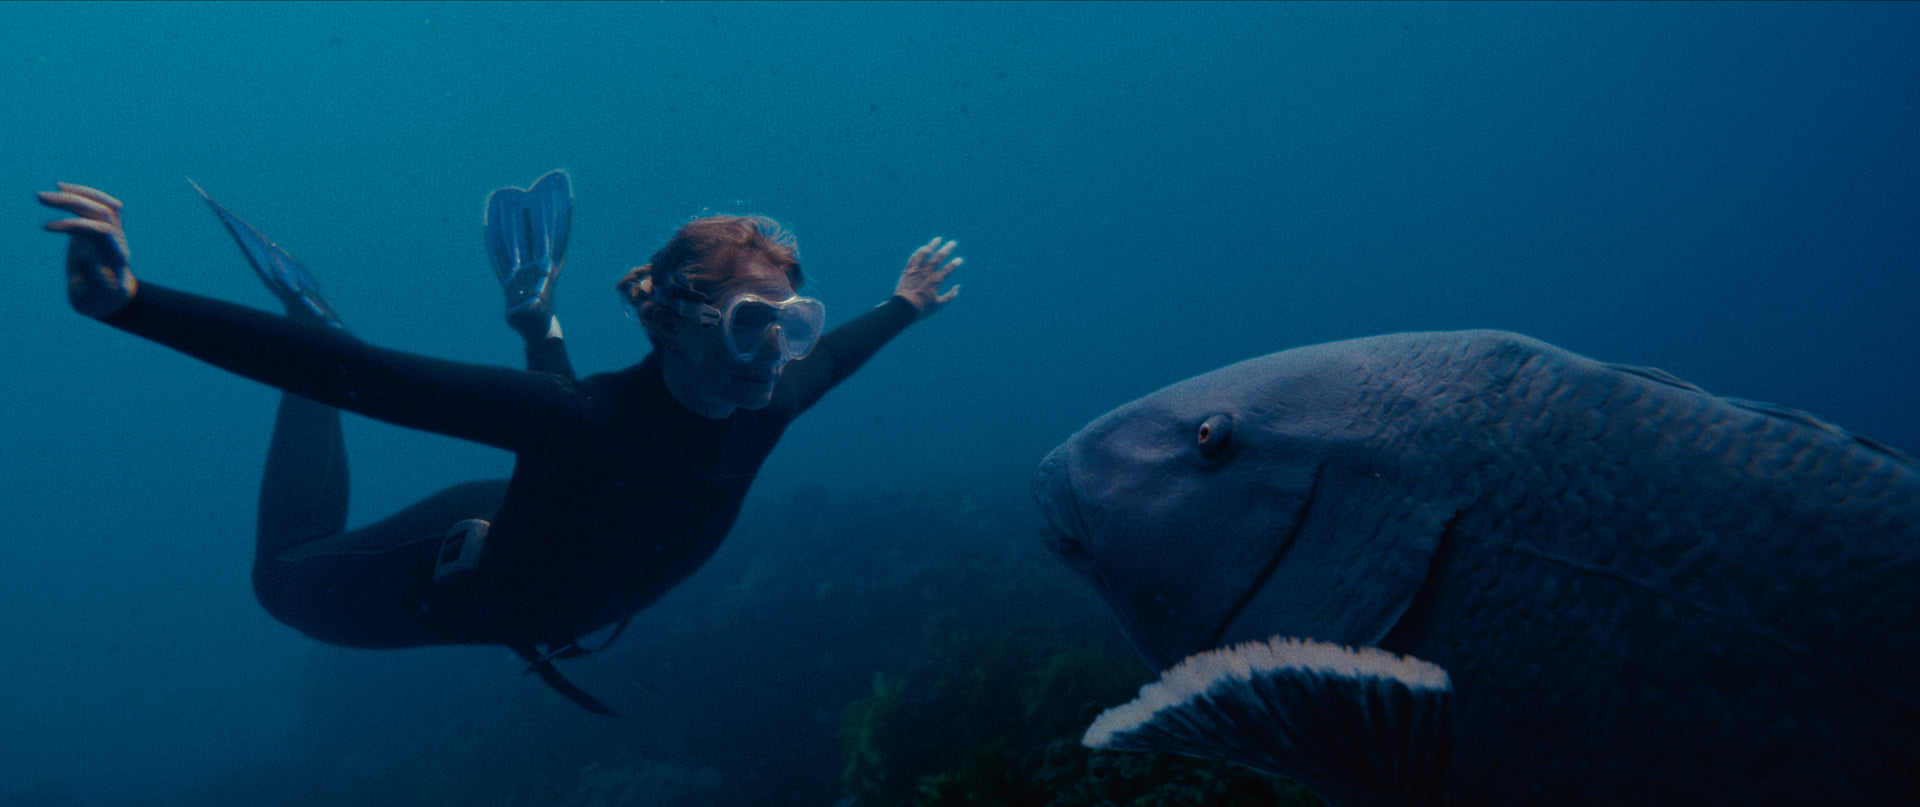 Opening image: Mia Wasikowska as Abby, finally reunited with her beloved Blueback after years abroad and a lifetime working for its protection.